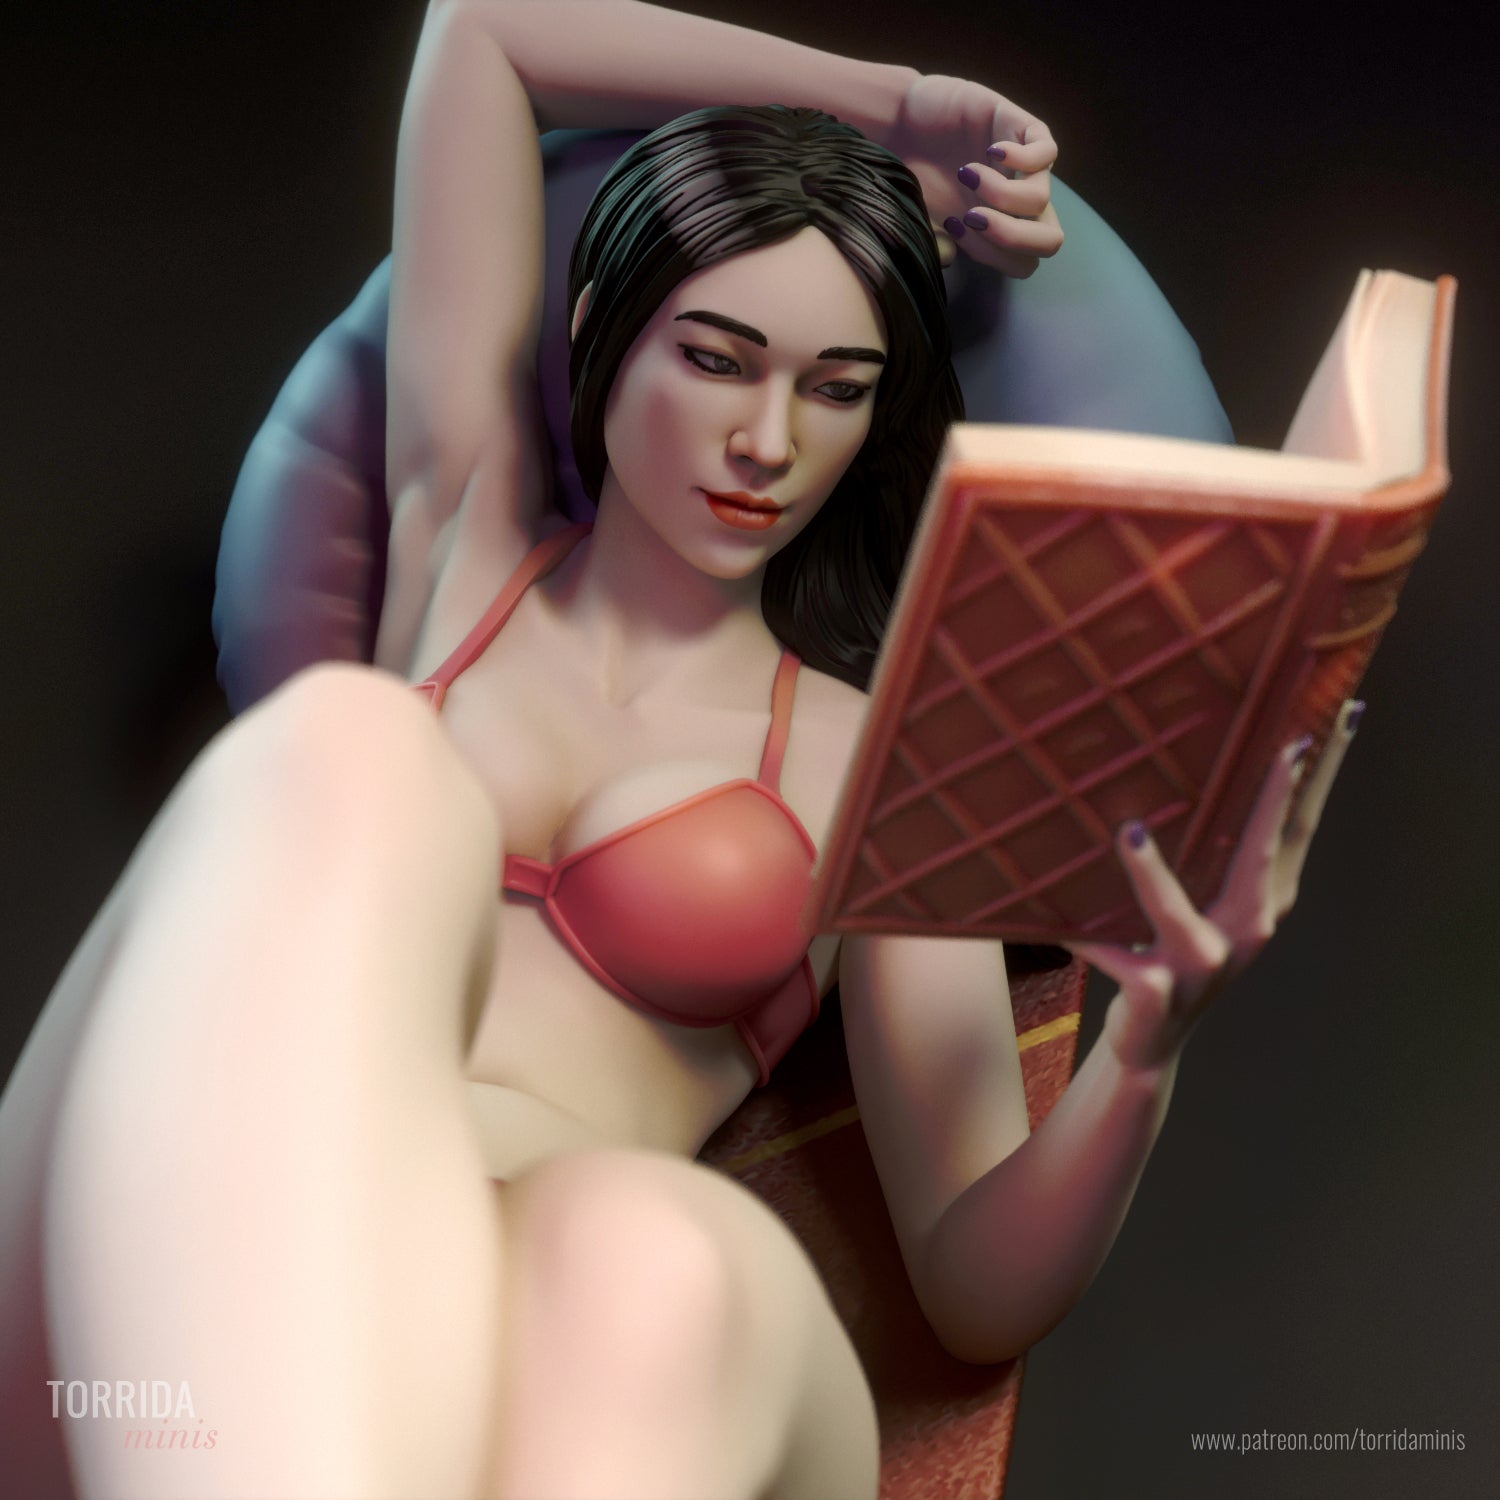 Moon, reader girl 3d Printed miniature FanArt by Torrida Minis S aled Collectables Statues & Figurines